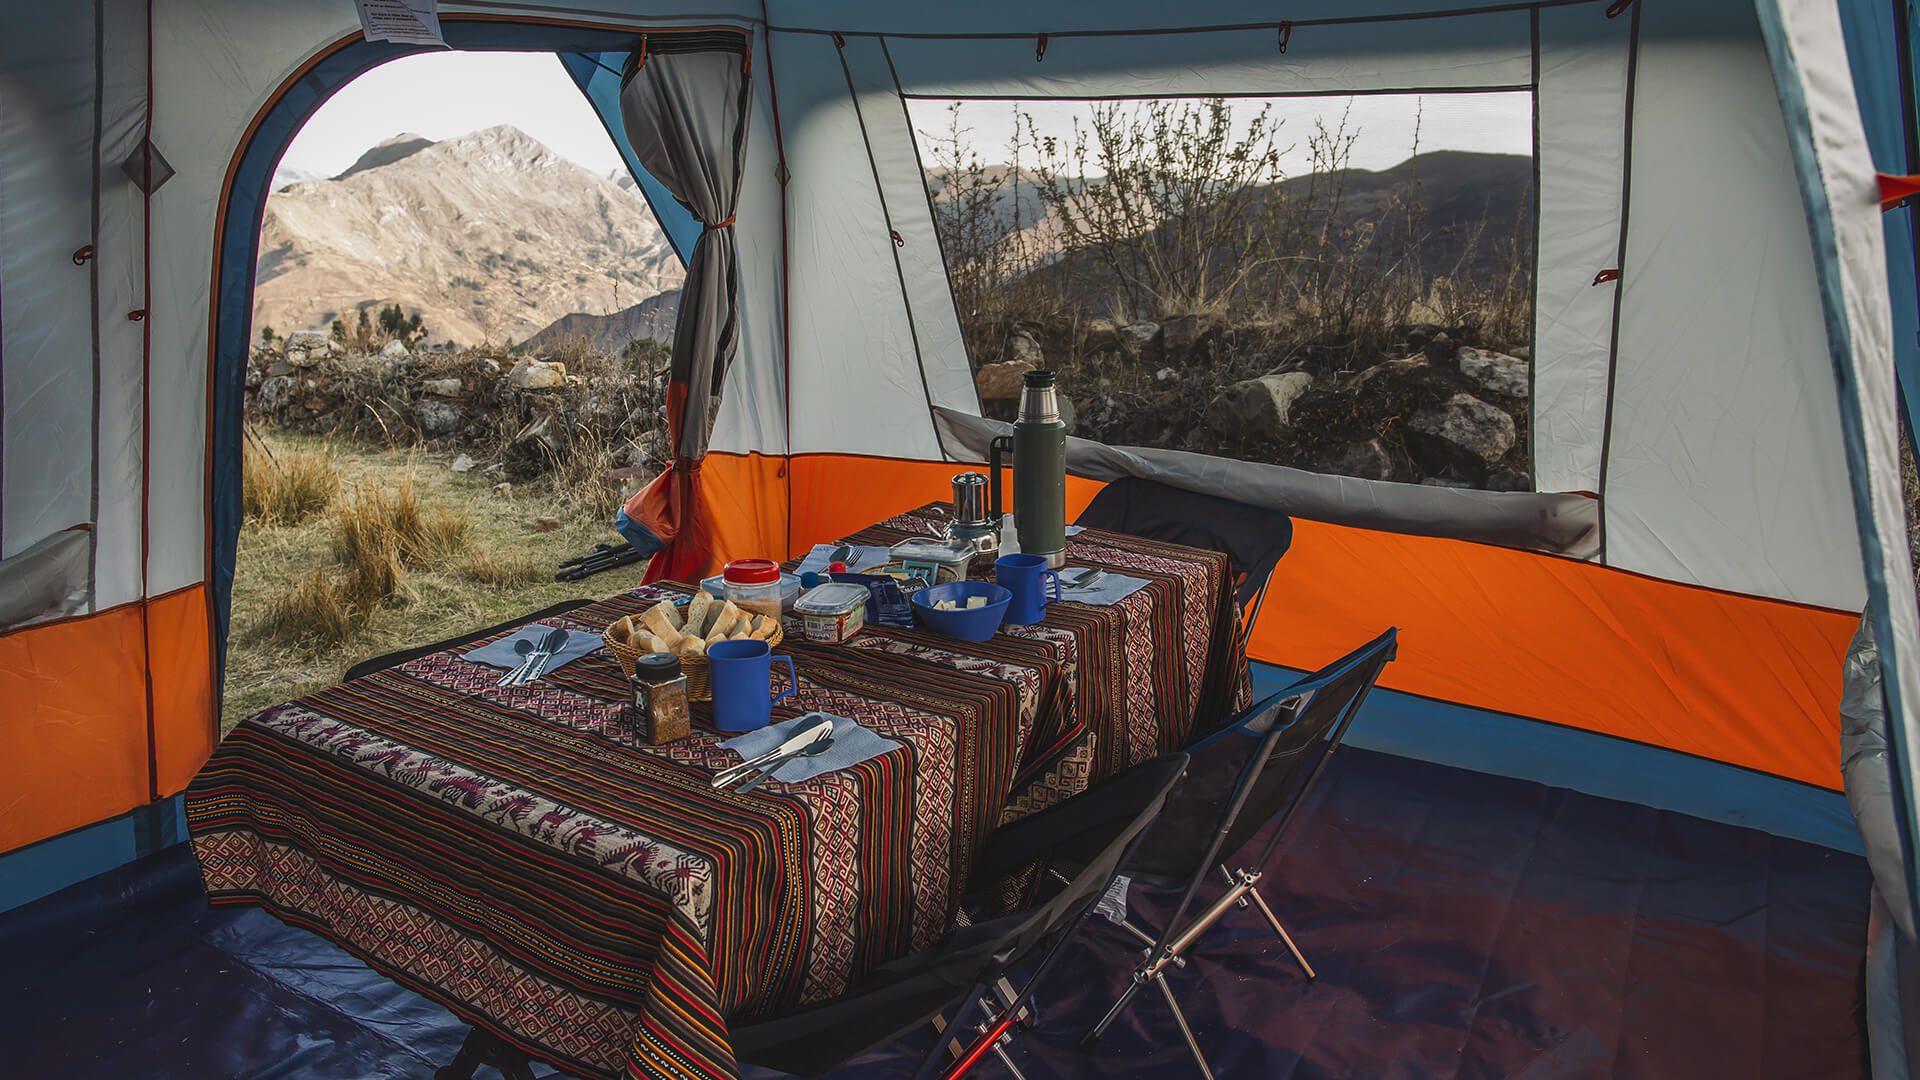 Luxury dining tent set up along the Qhapaq Ñan | Hike the Great Inca Road with RESPONSible Travel Peru